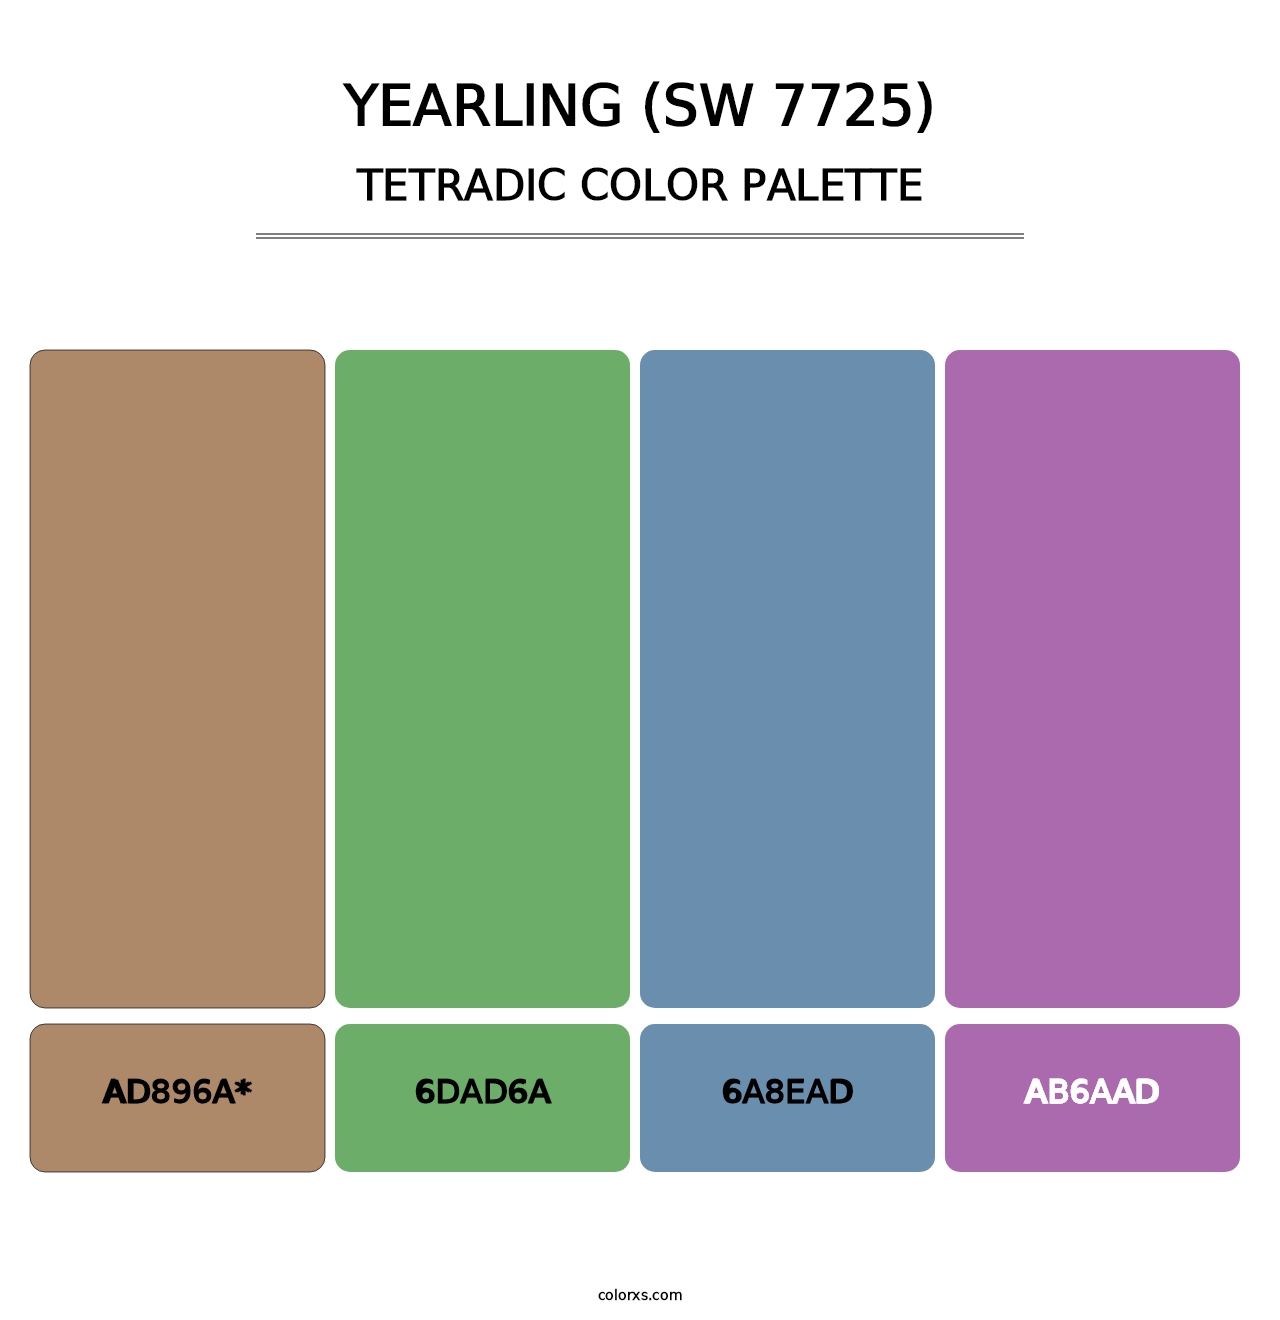 Yearling (SW 7725) - Tetradic Color Palette